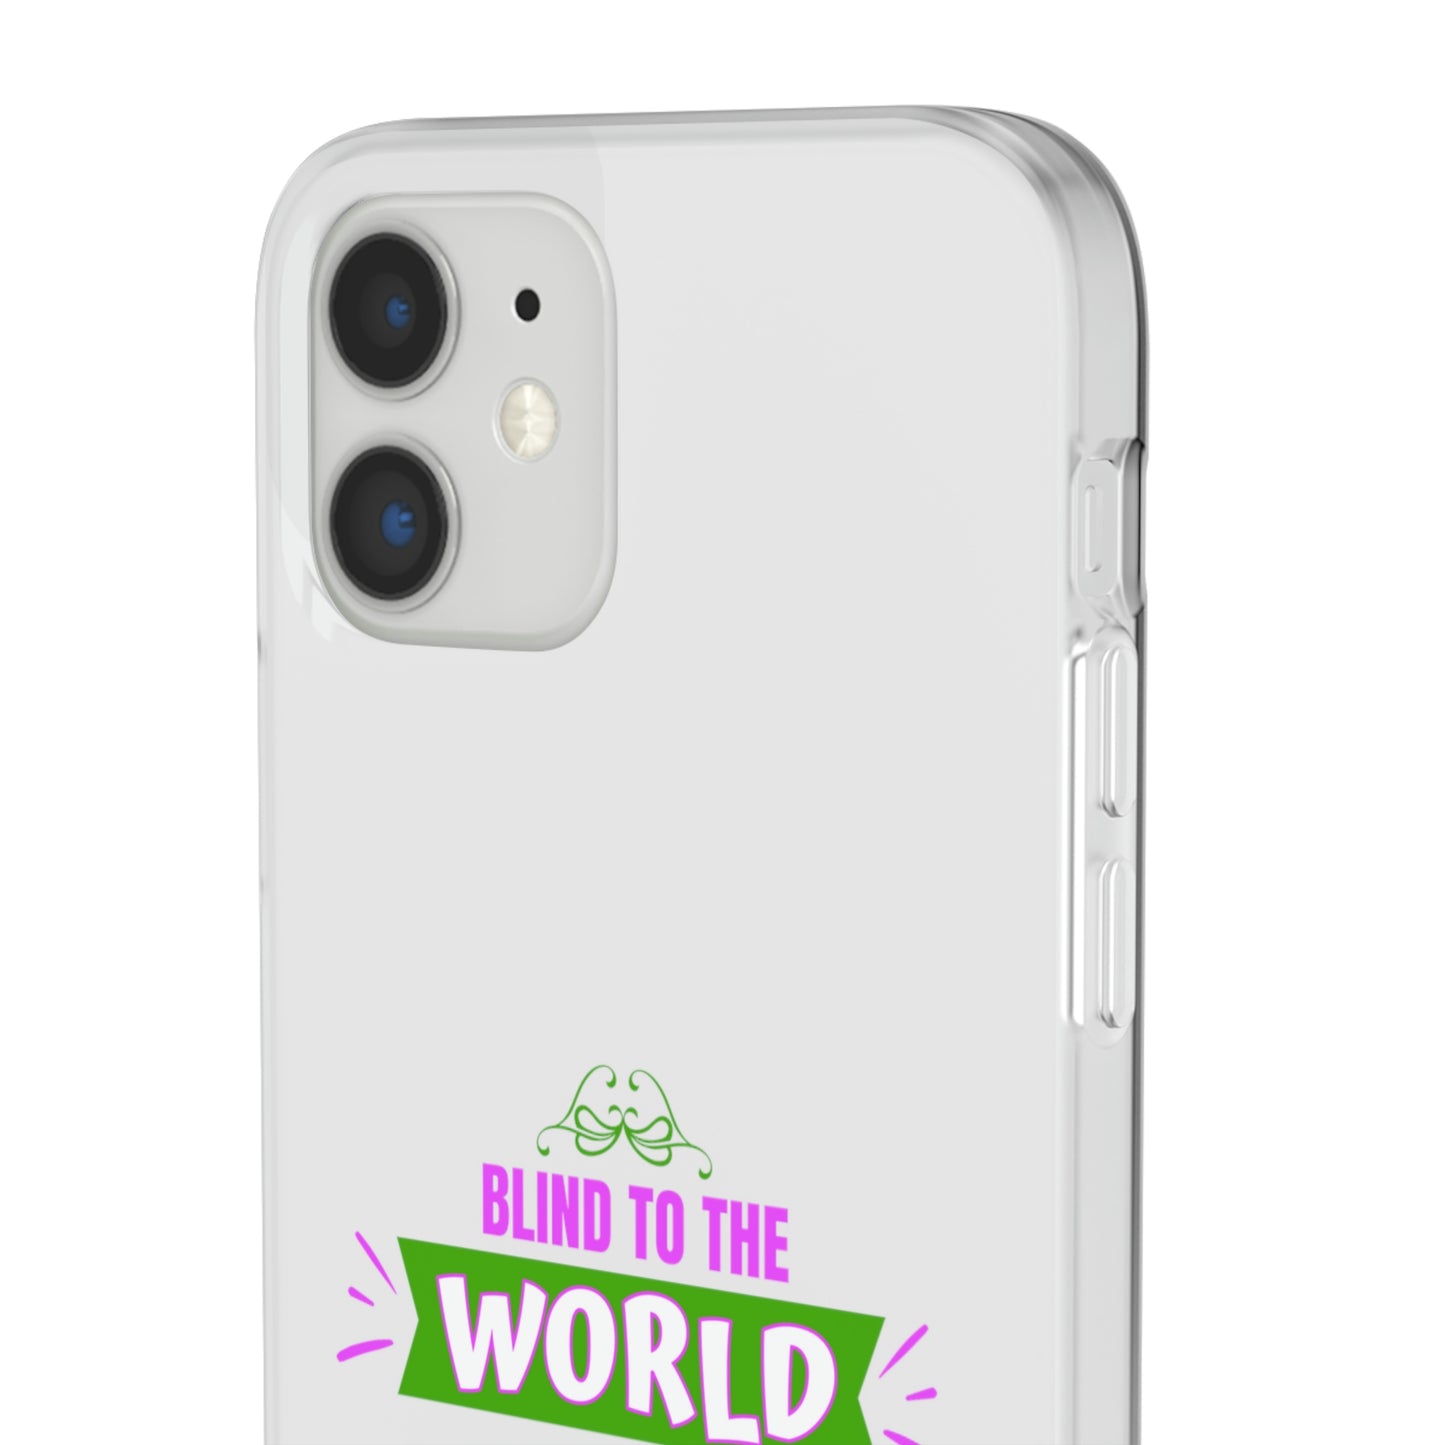 Blind To The World But His Greatest Treasure Flexi Phone Case